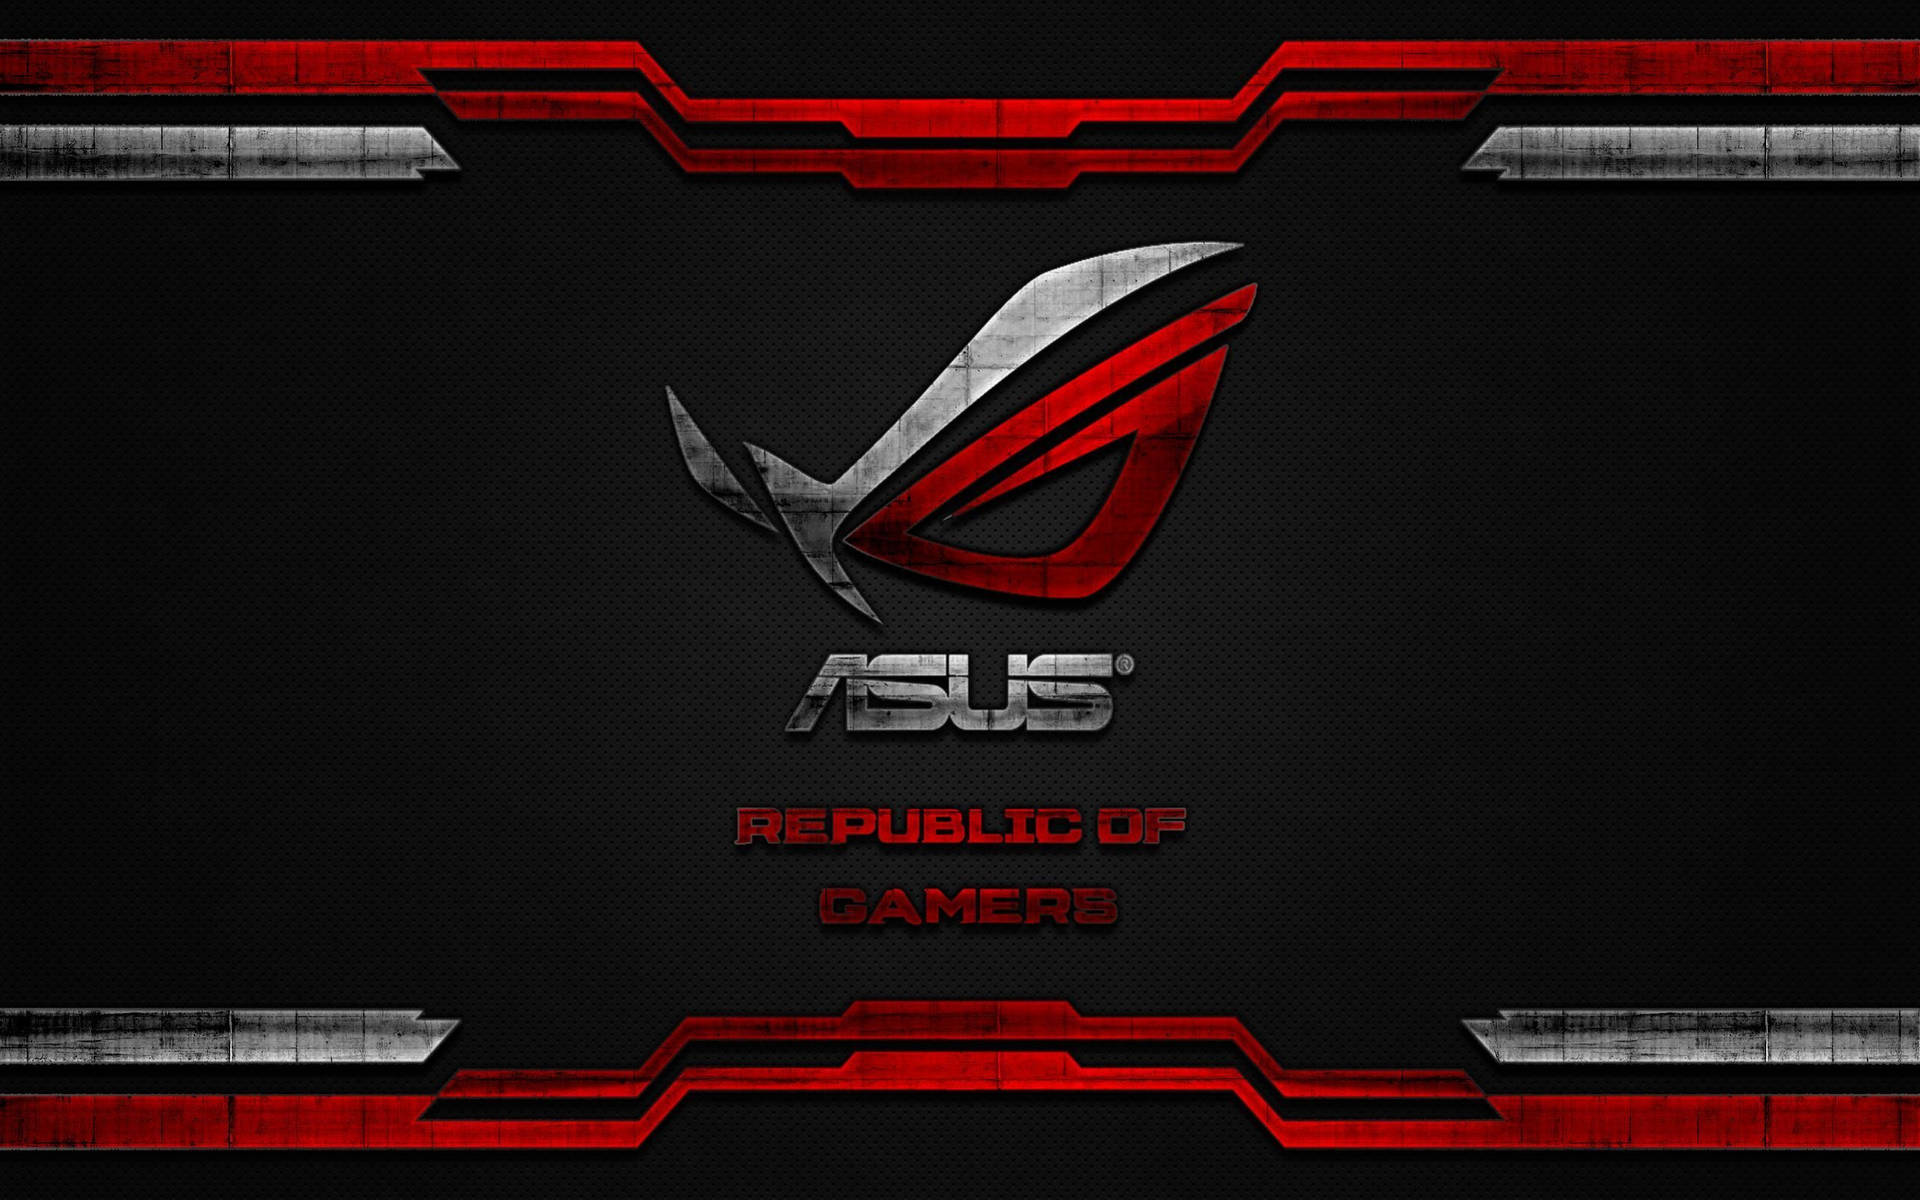 Official-looking Asus Rog Logo Background